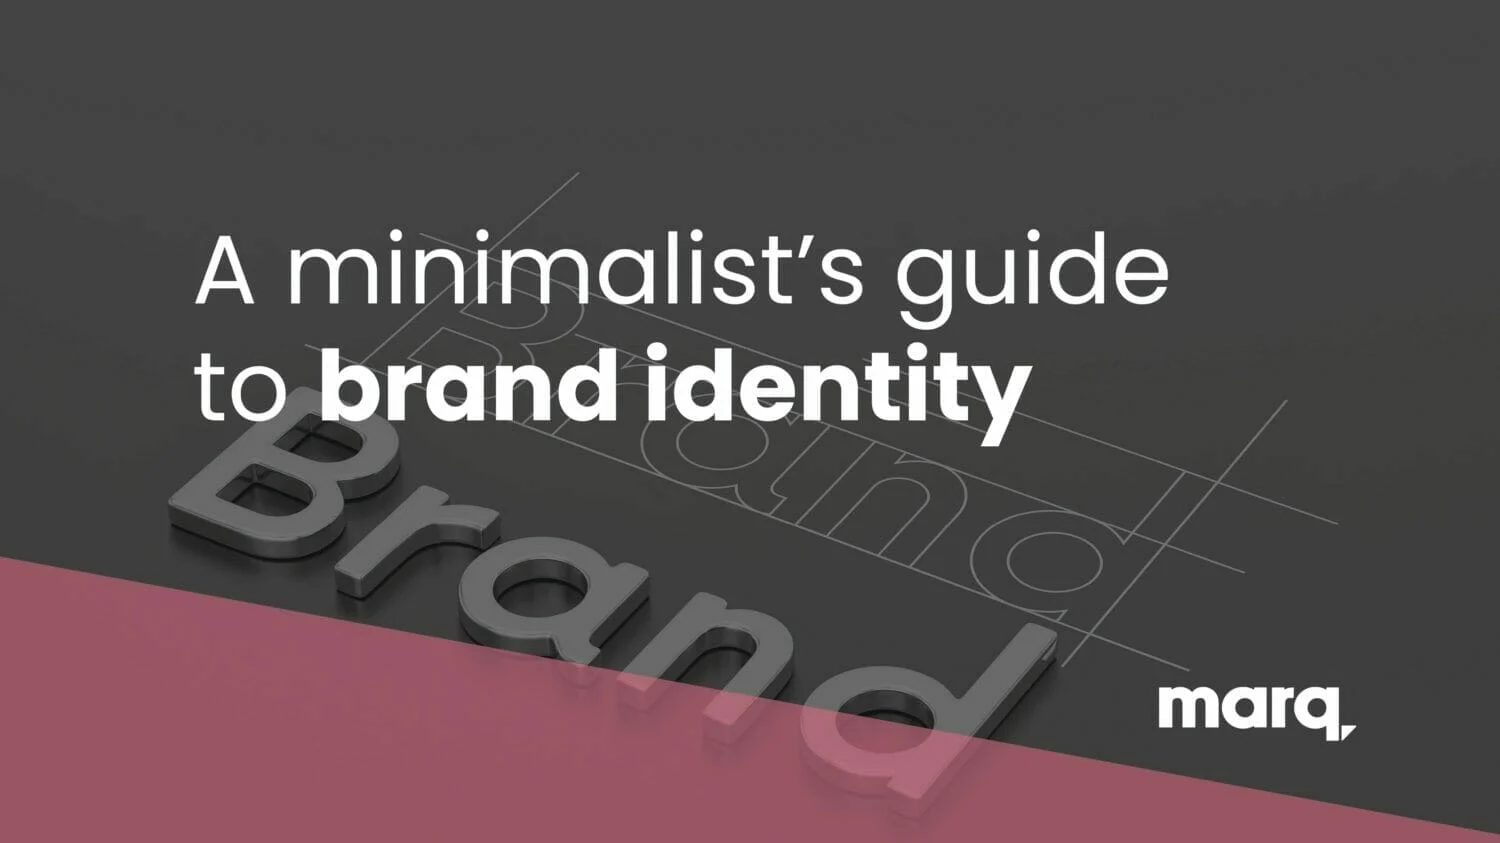 a minimalist's guide to brand identity